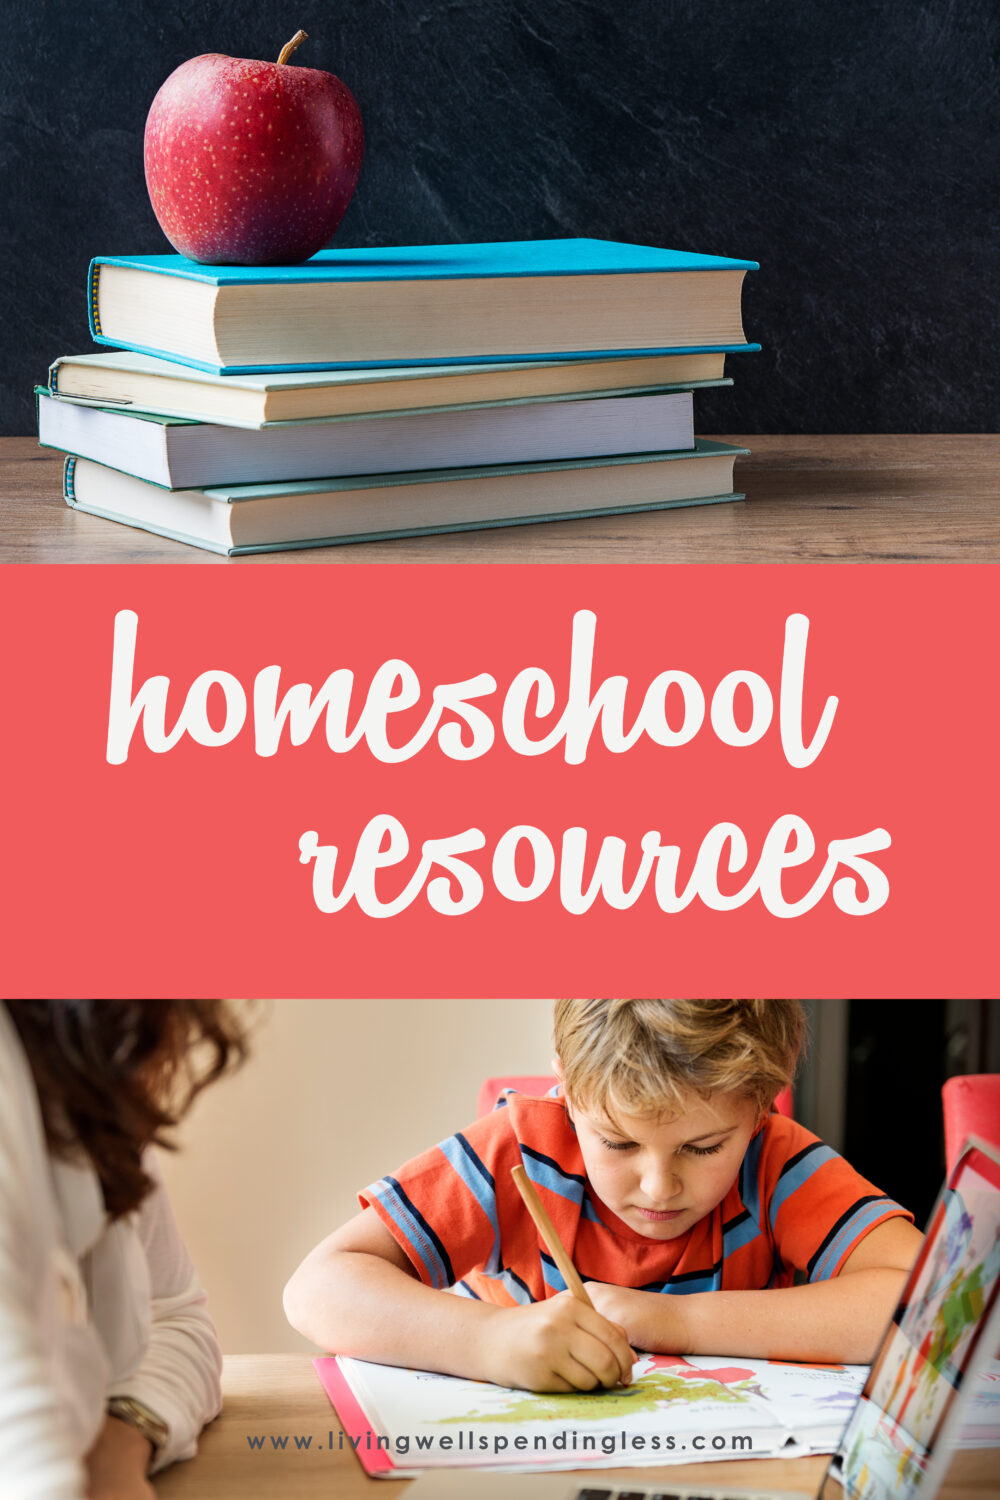 Here is a list of the home-school resources we are currently using or have used (and liked) in the past. I hope it helps as you are trying to find what work for your kiddos and family.